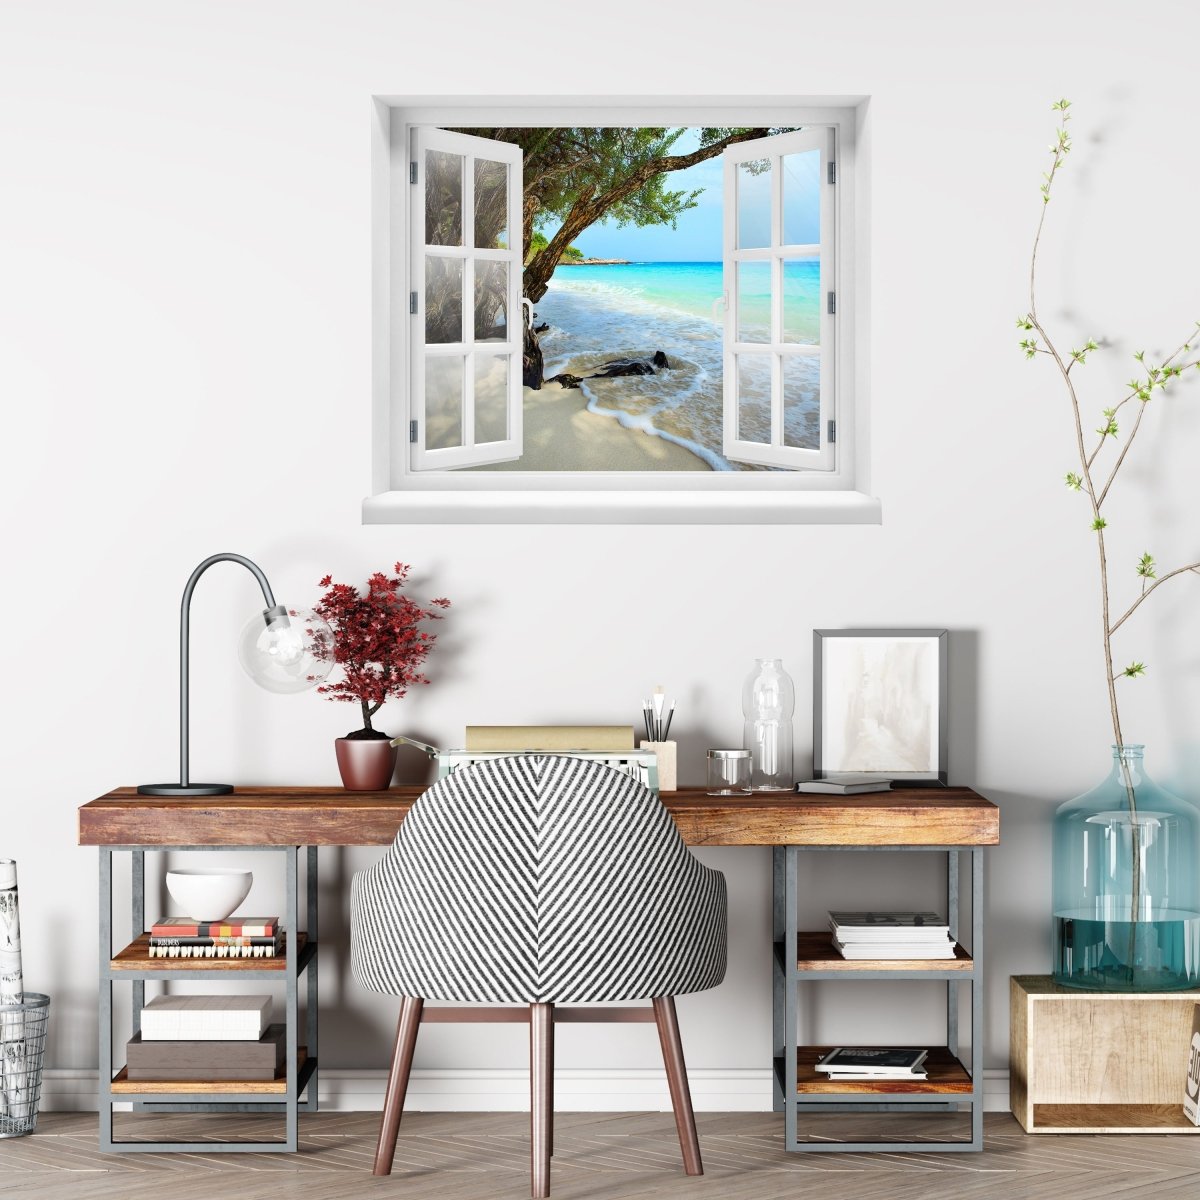 3D Wall Sticker Calm and Peaceful Beach. Rayong Province - Wall Decal M0899